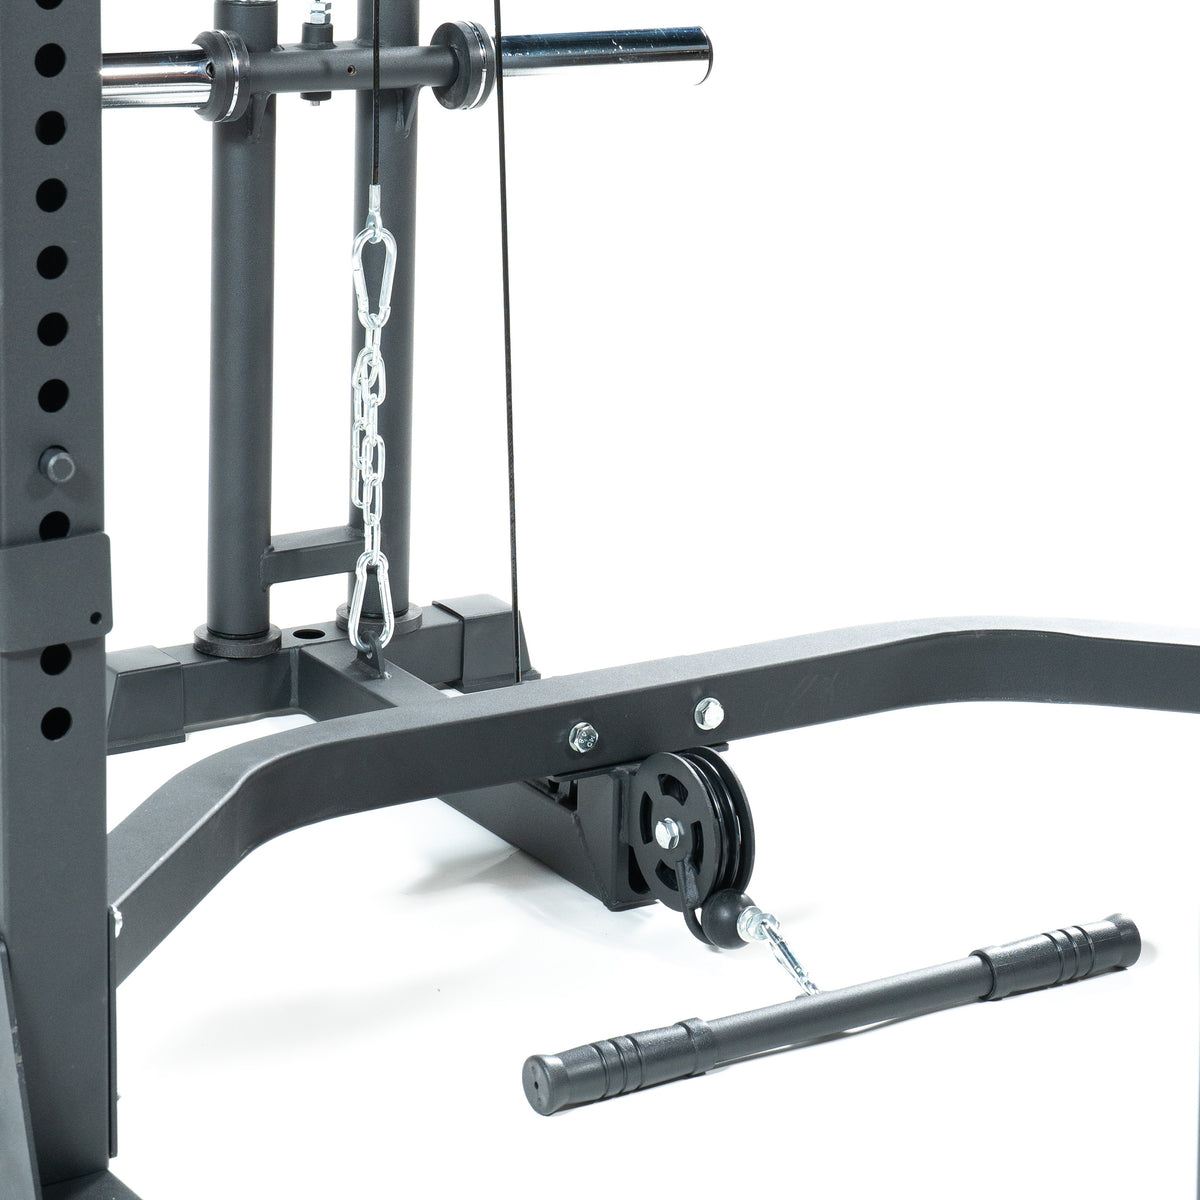 FitWay Equip. Power Cage Lat Attachment